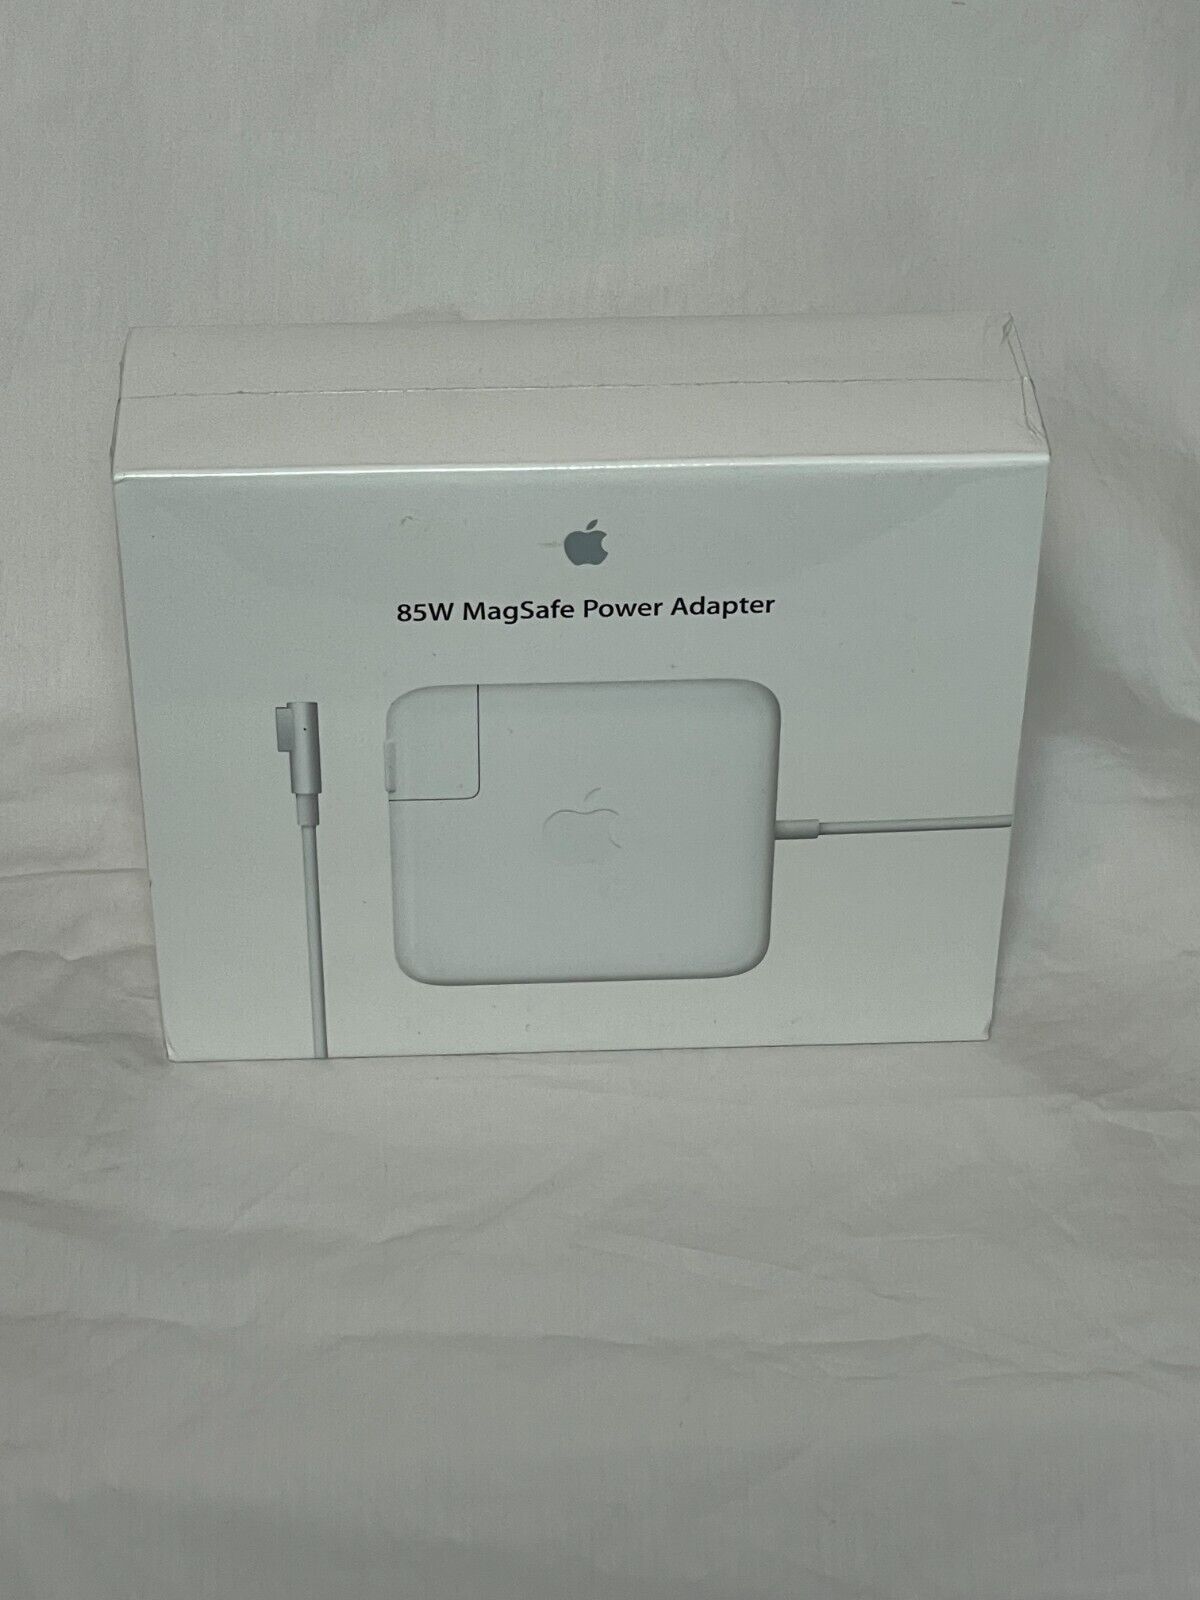 Brand New Genuine Apple 85W MagSafe Power Adapter Mac MacBook Pro Sealed In Box